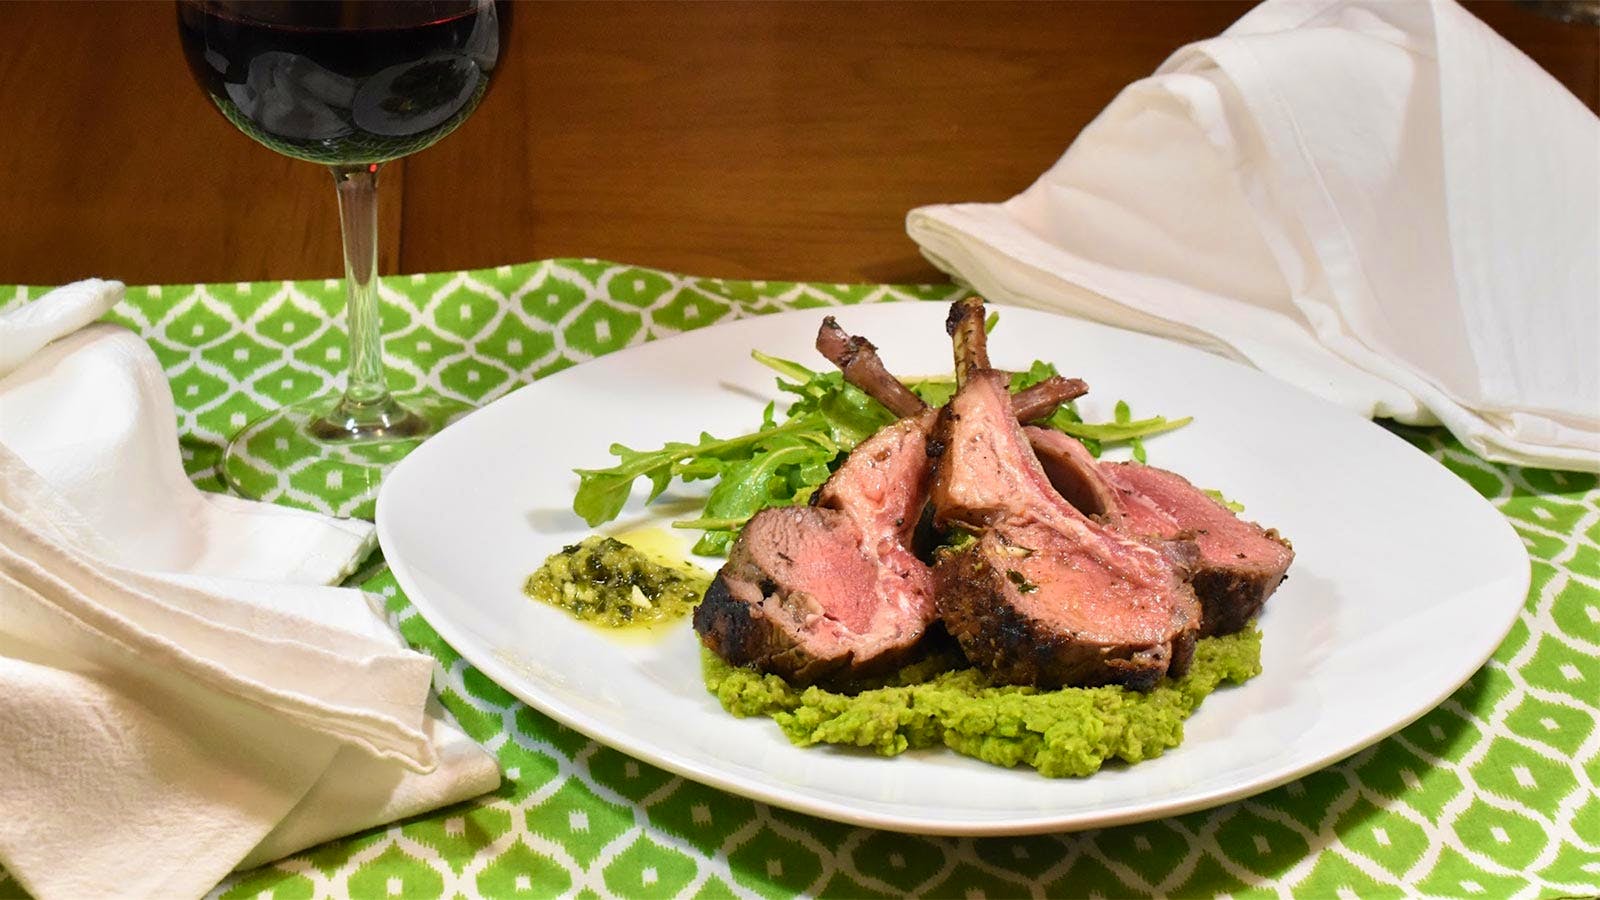 8 & $20: Lamb Chops with Mint Gremolata and Minty Mashed Peas